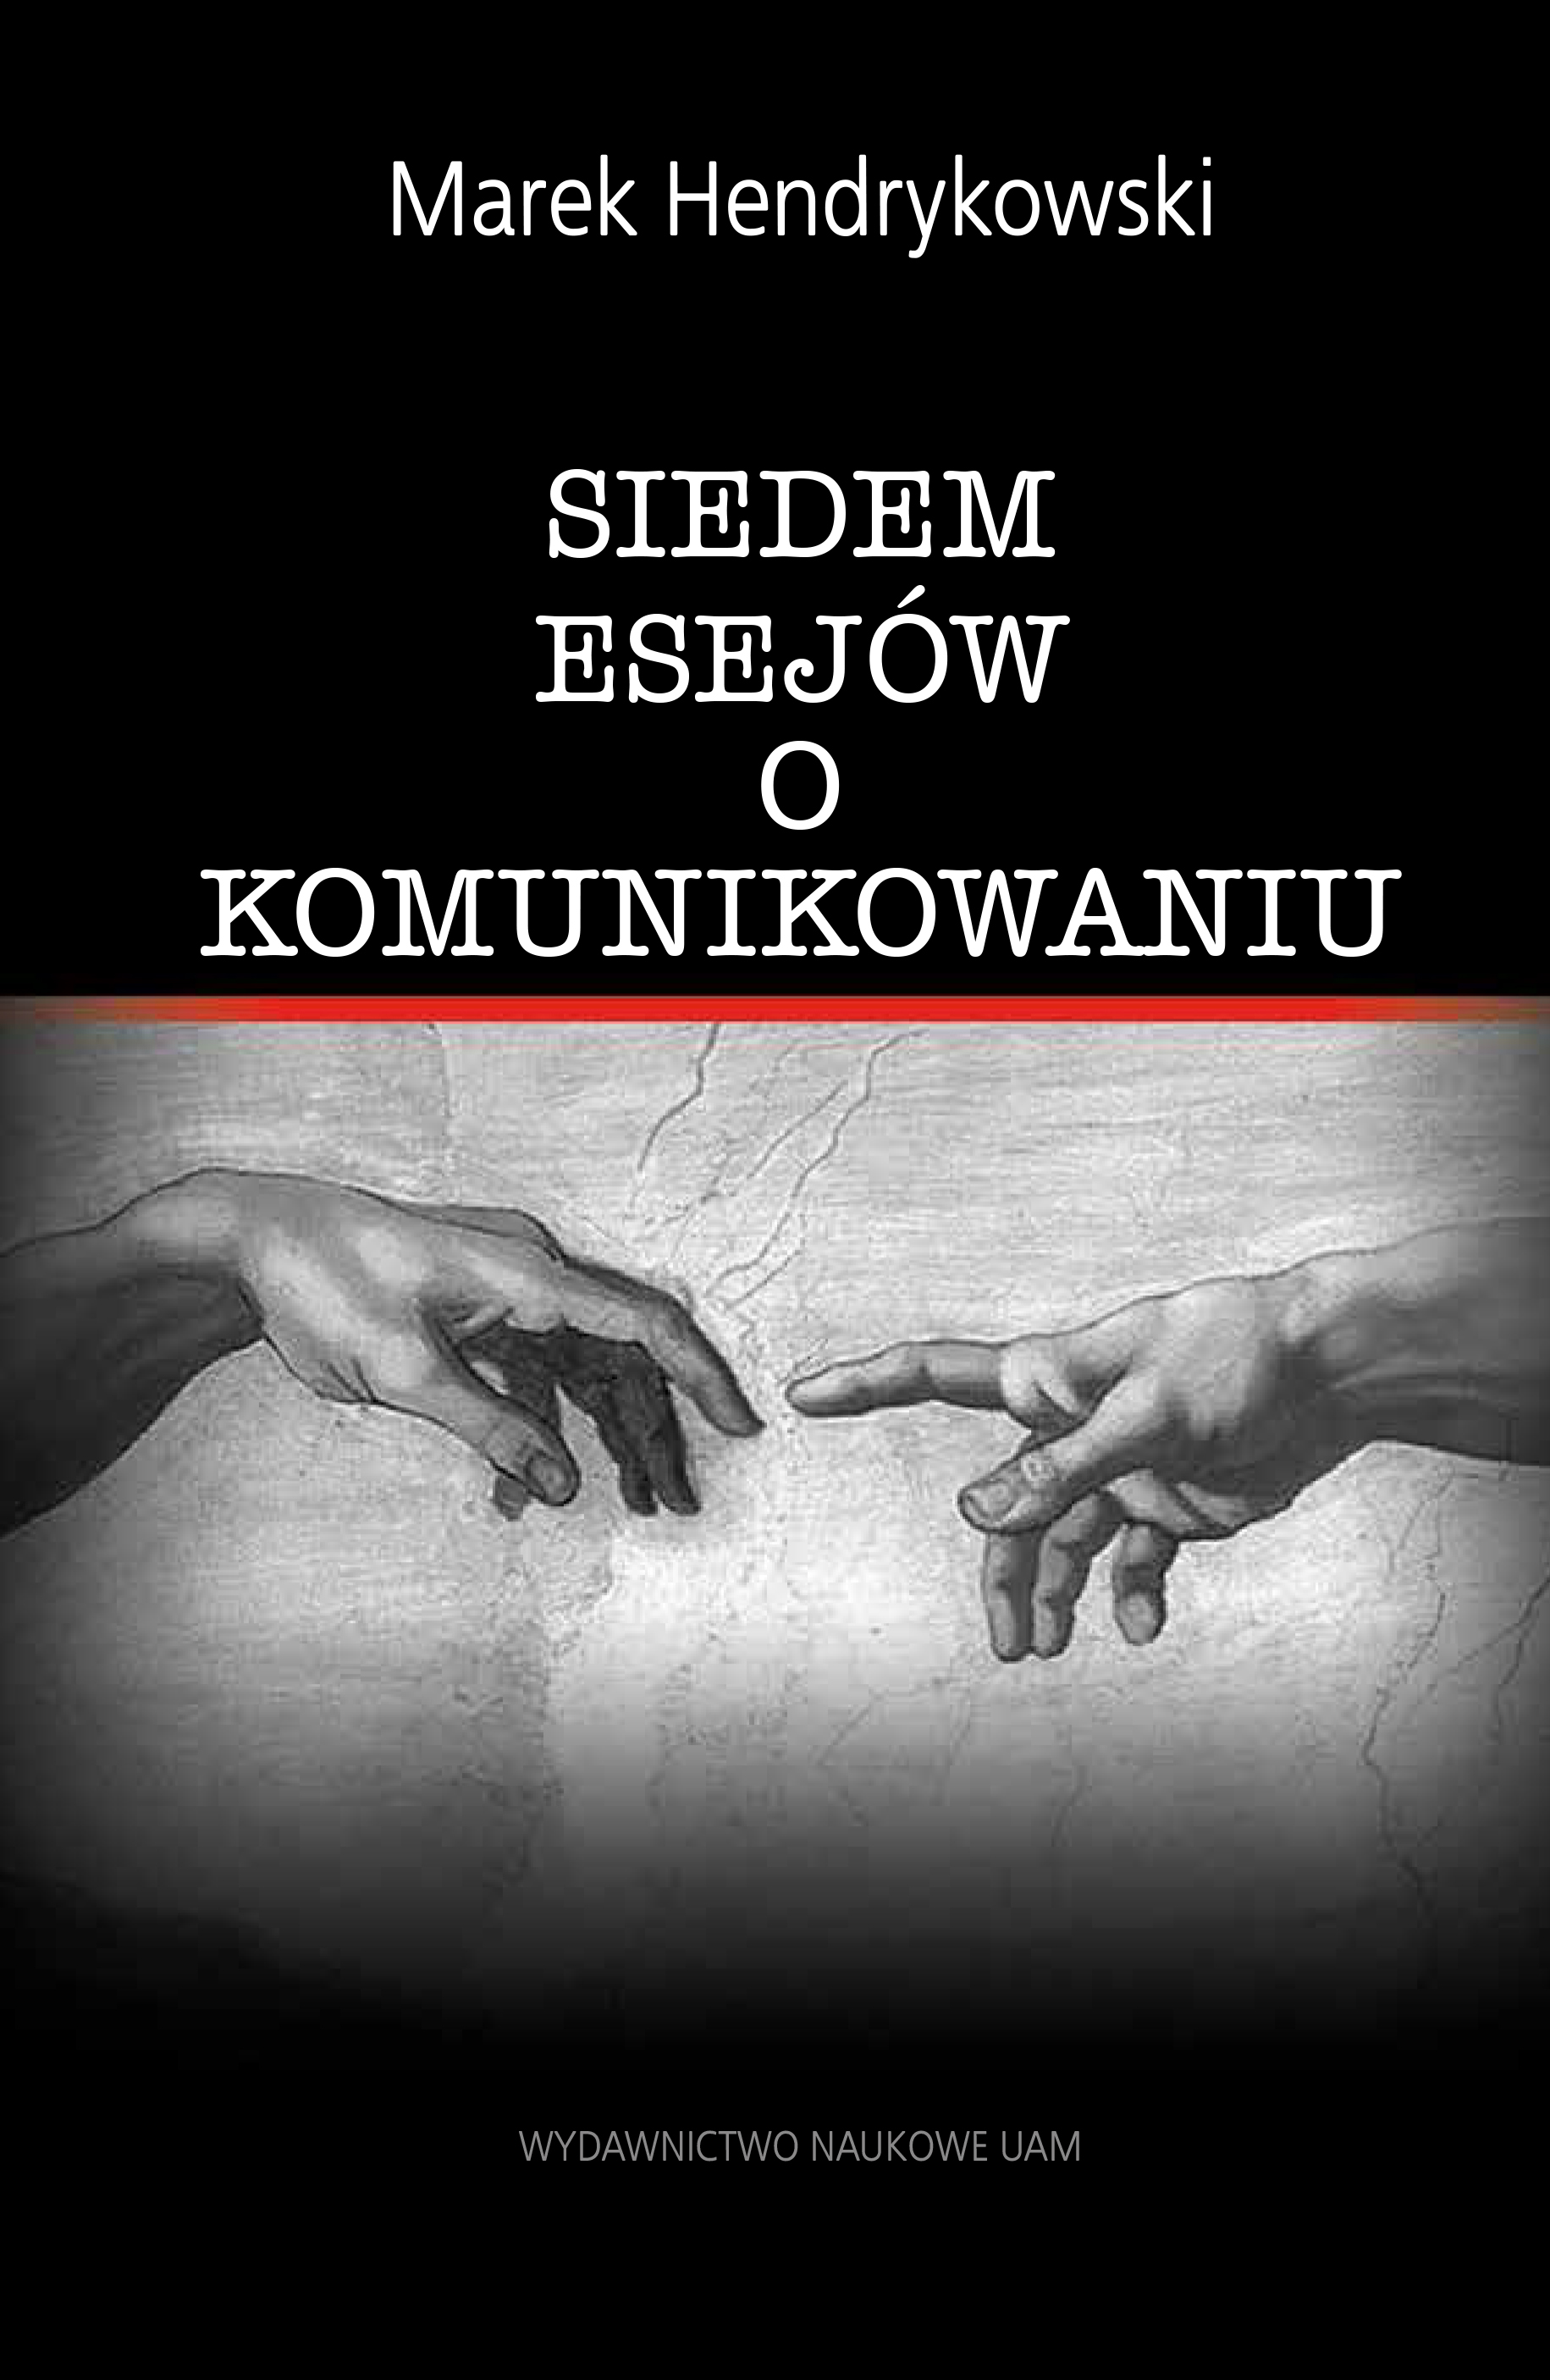 Seven essays on communicating Cover Image